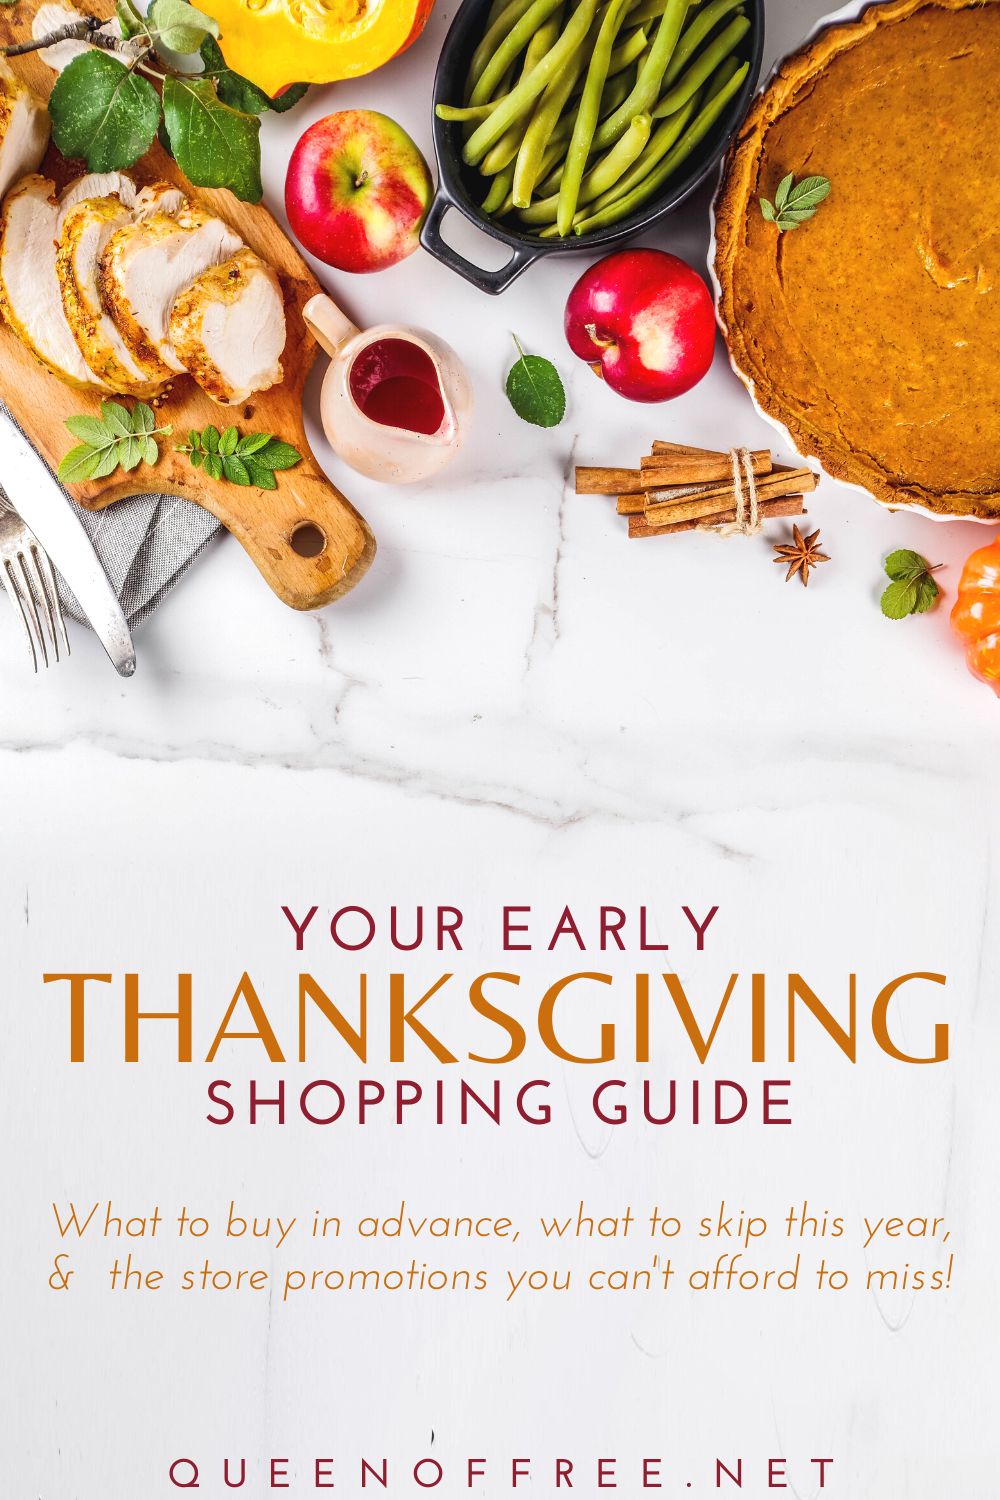 Turkey shortages, inflation, oh my! This early Thanksgiving Shopping Guide has the tips you need to save money this year.